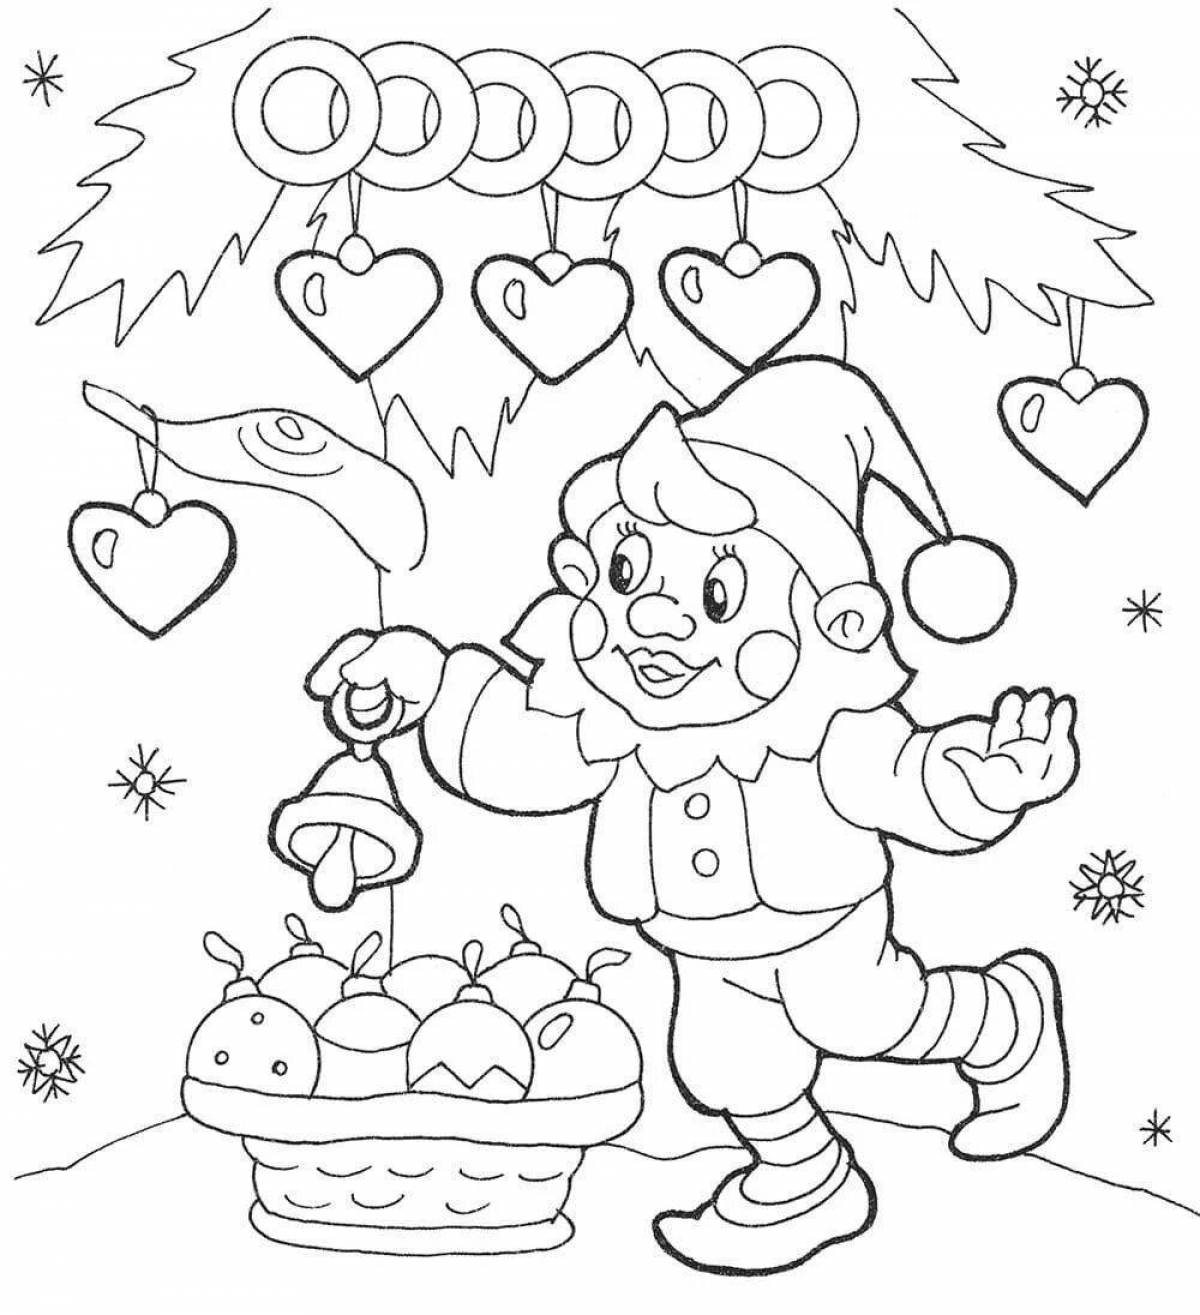 Great Christmas coloring book for preschoolers